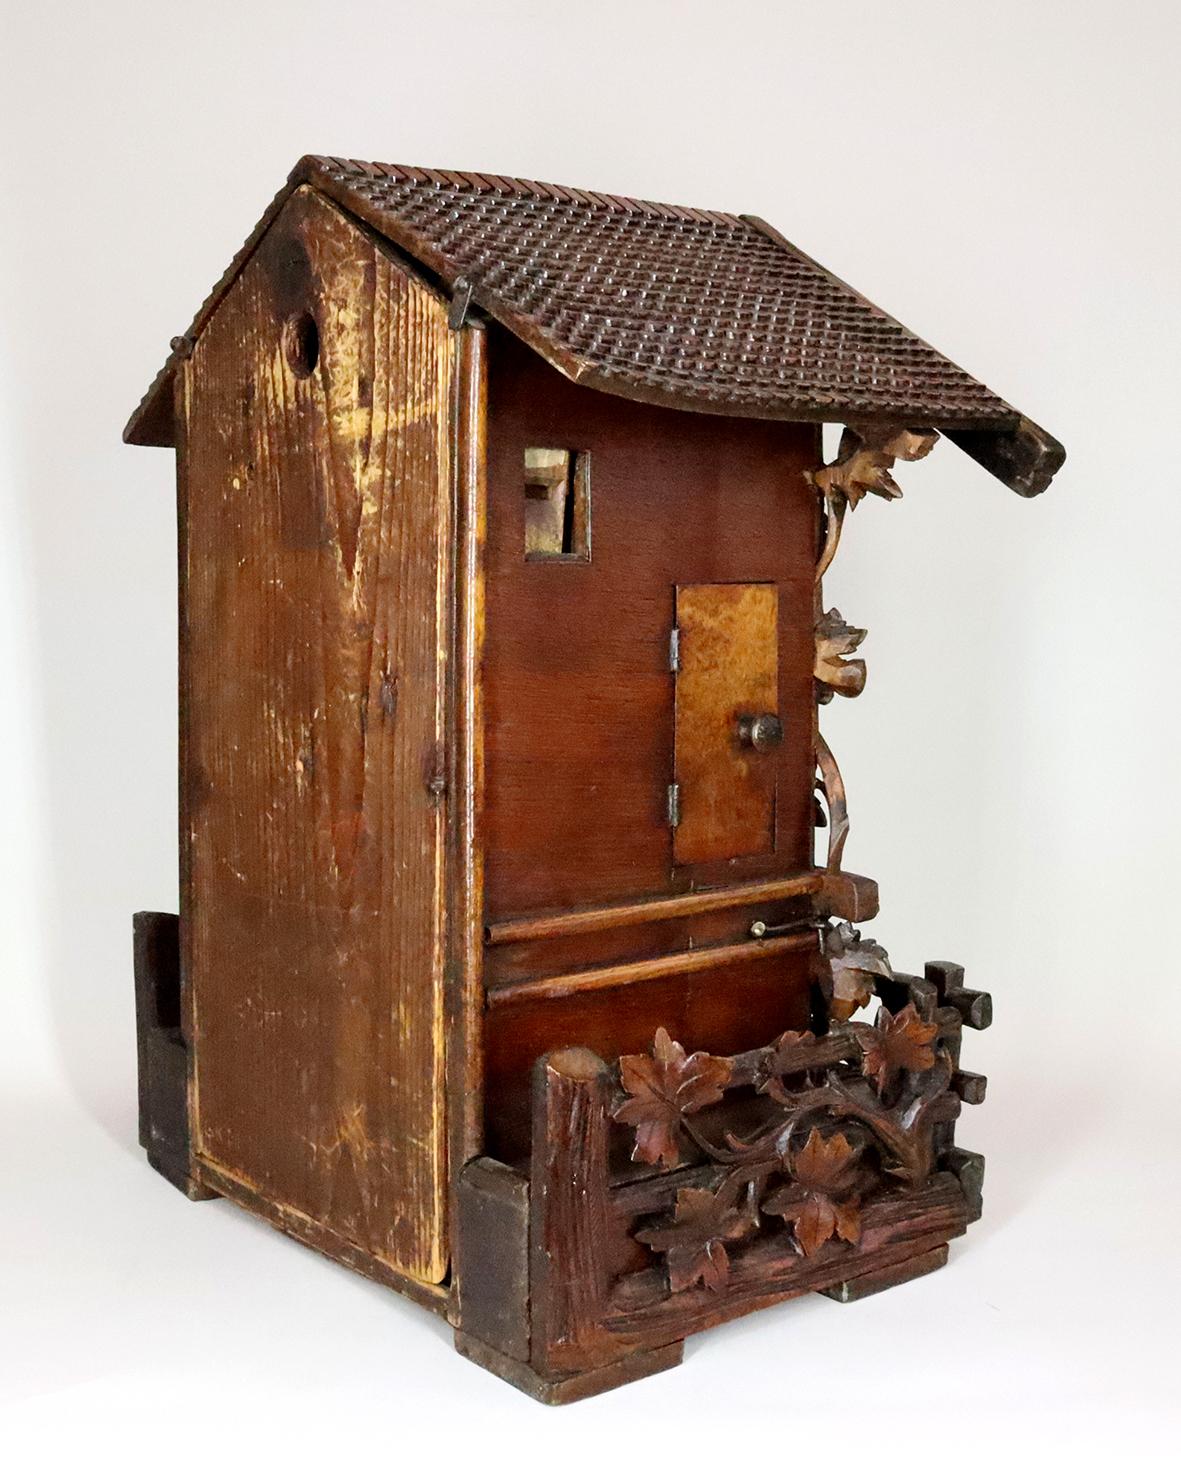 This Black Forest cuckoo clock has a twin fusee movement complete with typical wooden plates and original bellows and pendulum. The case is made in the highest tradition of black forest wood carving, with intricately hand carved roof shingles and